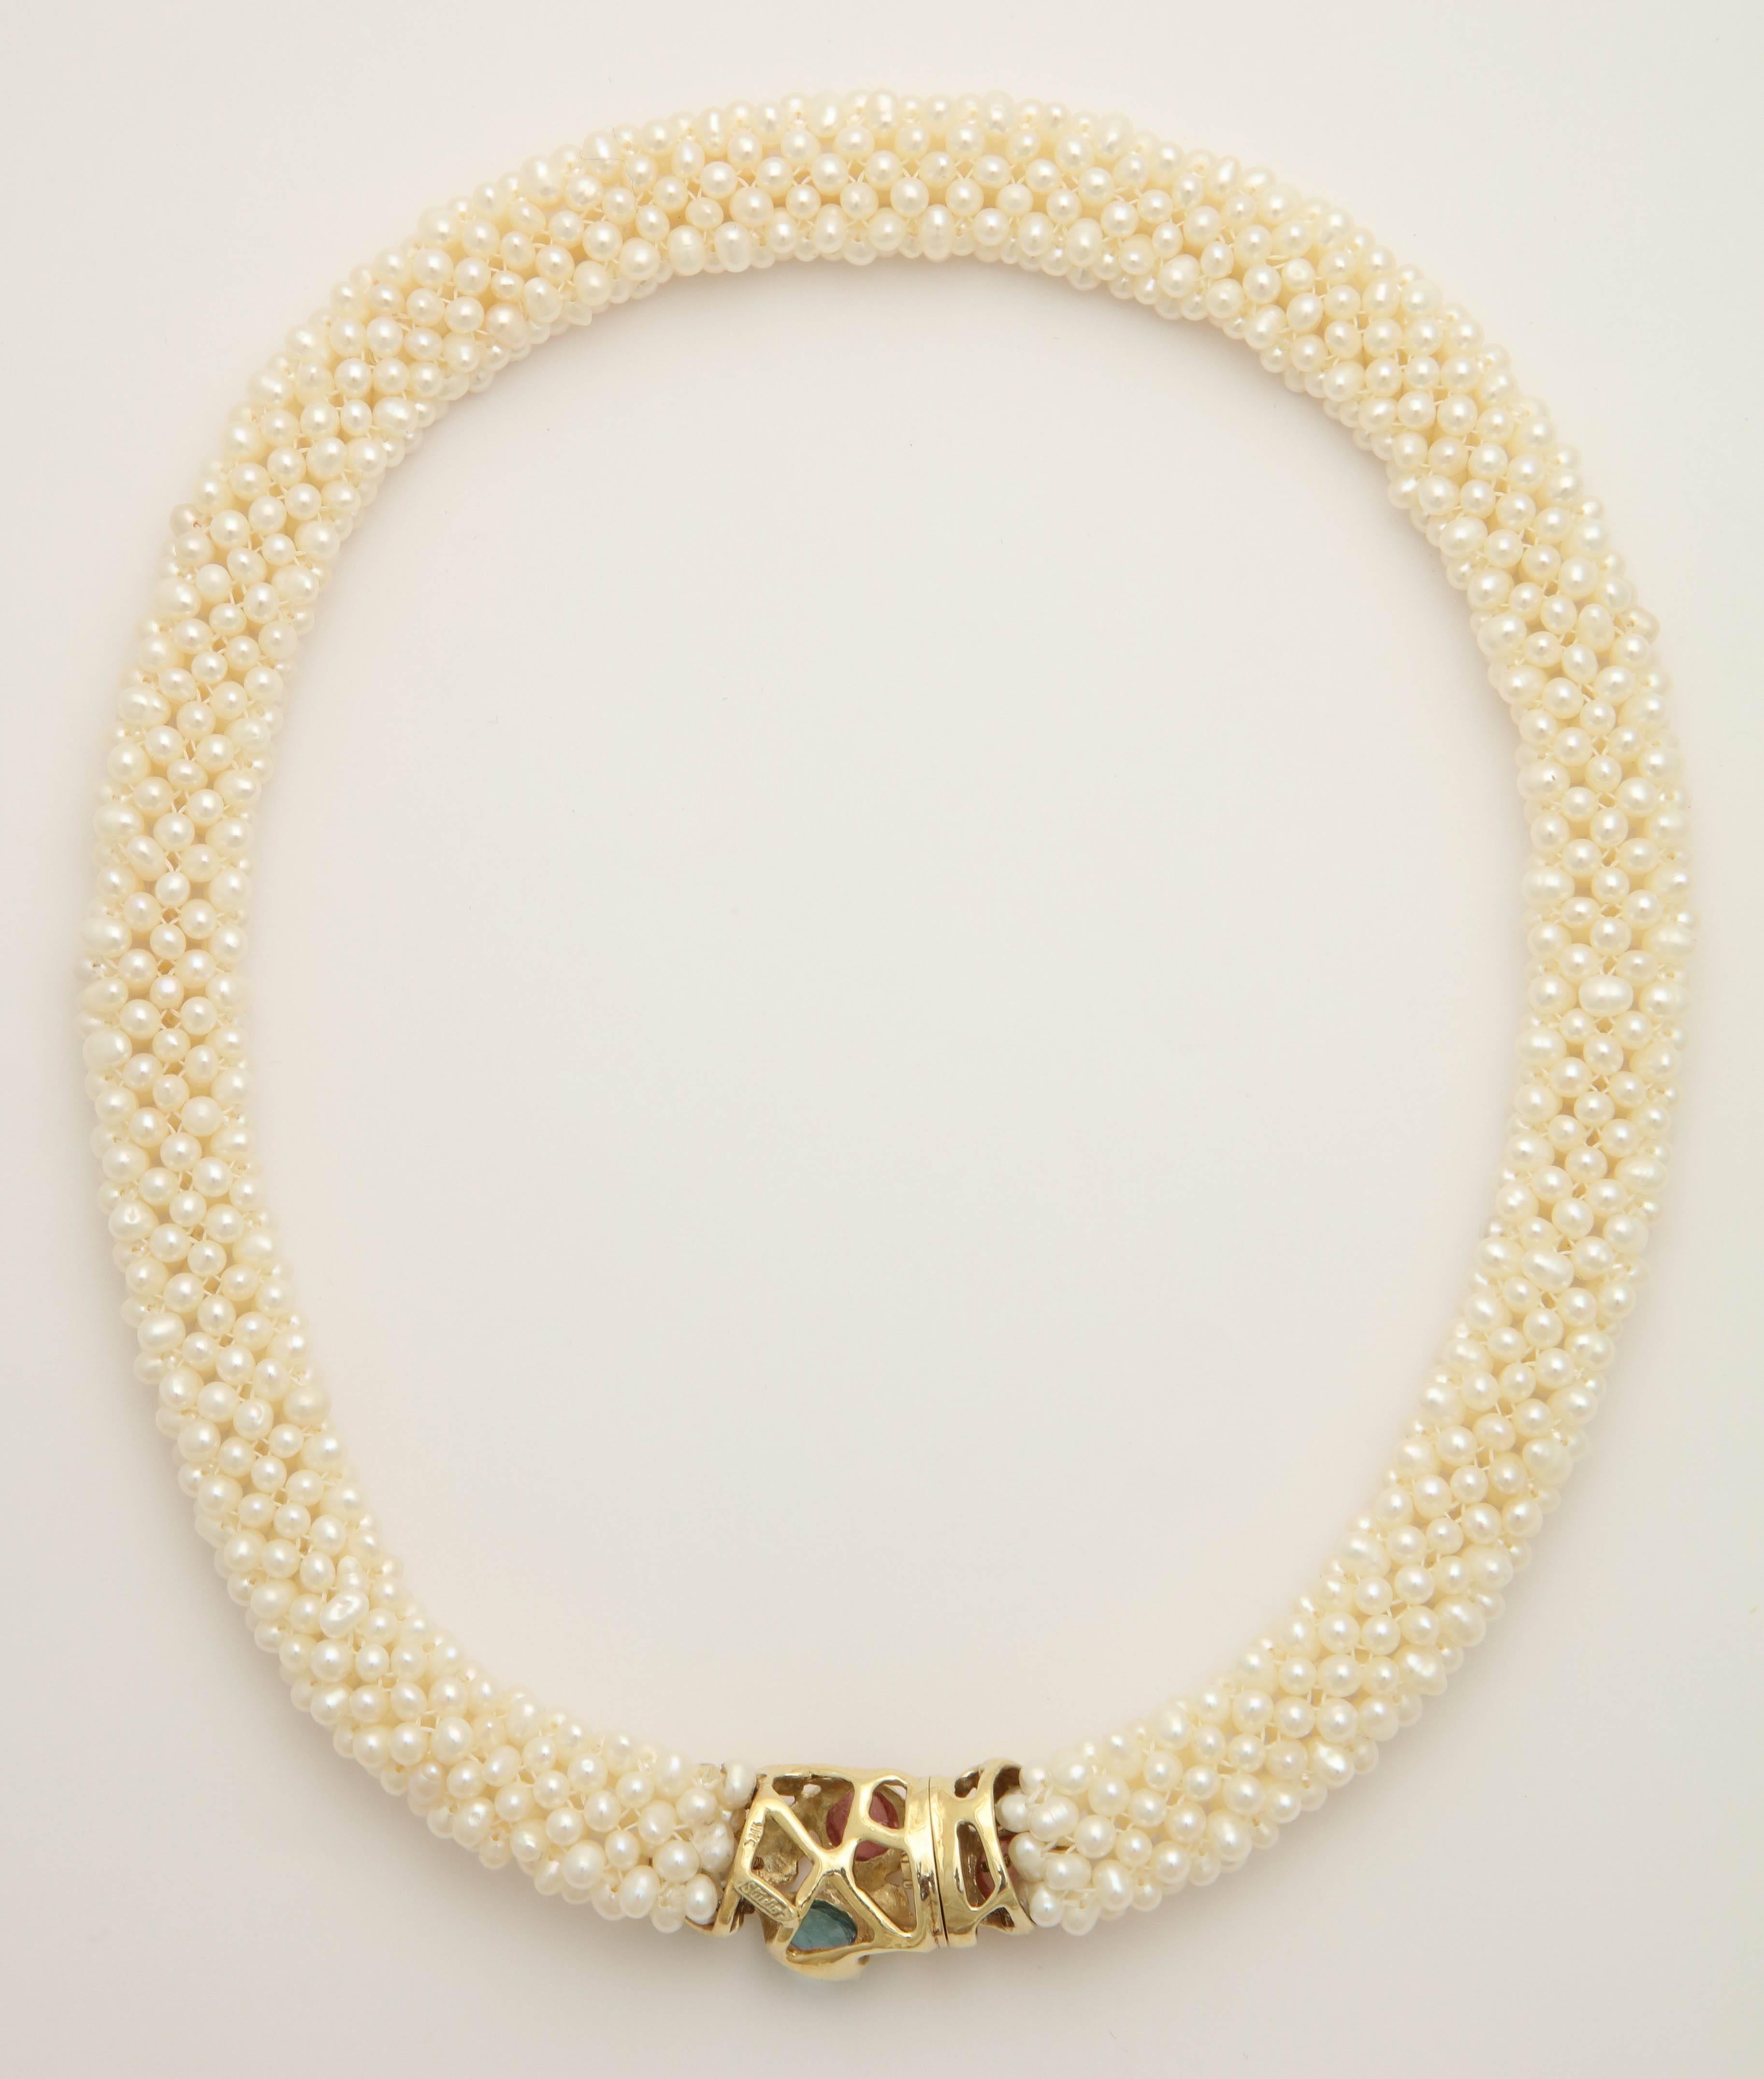 shiv roy pearl necklace